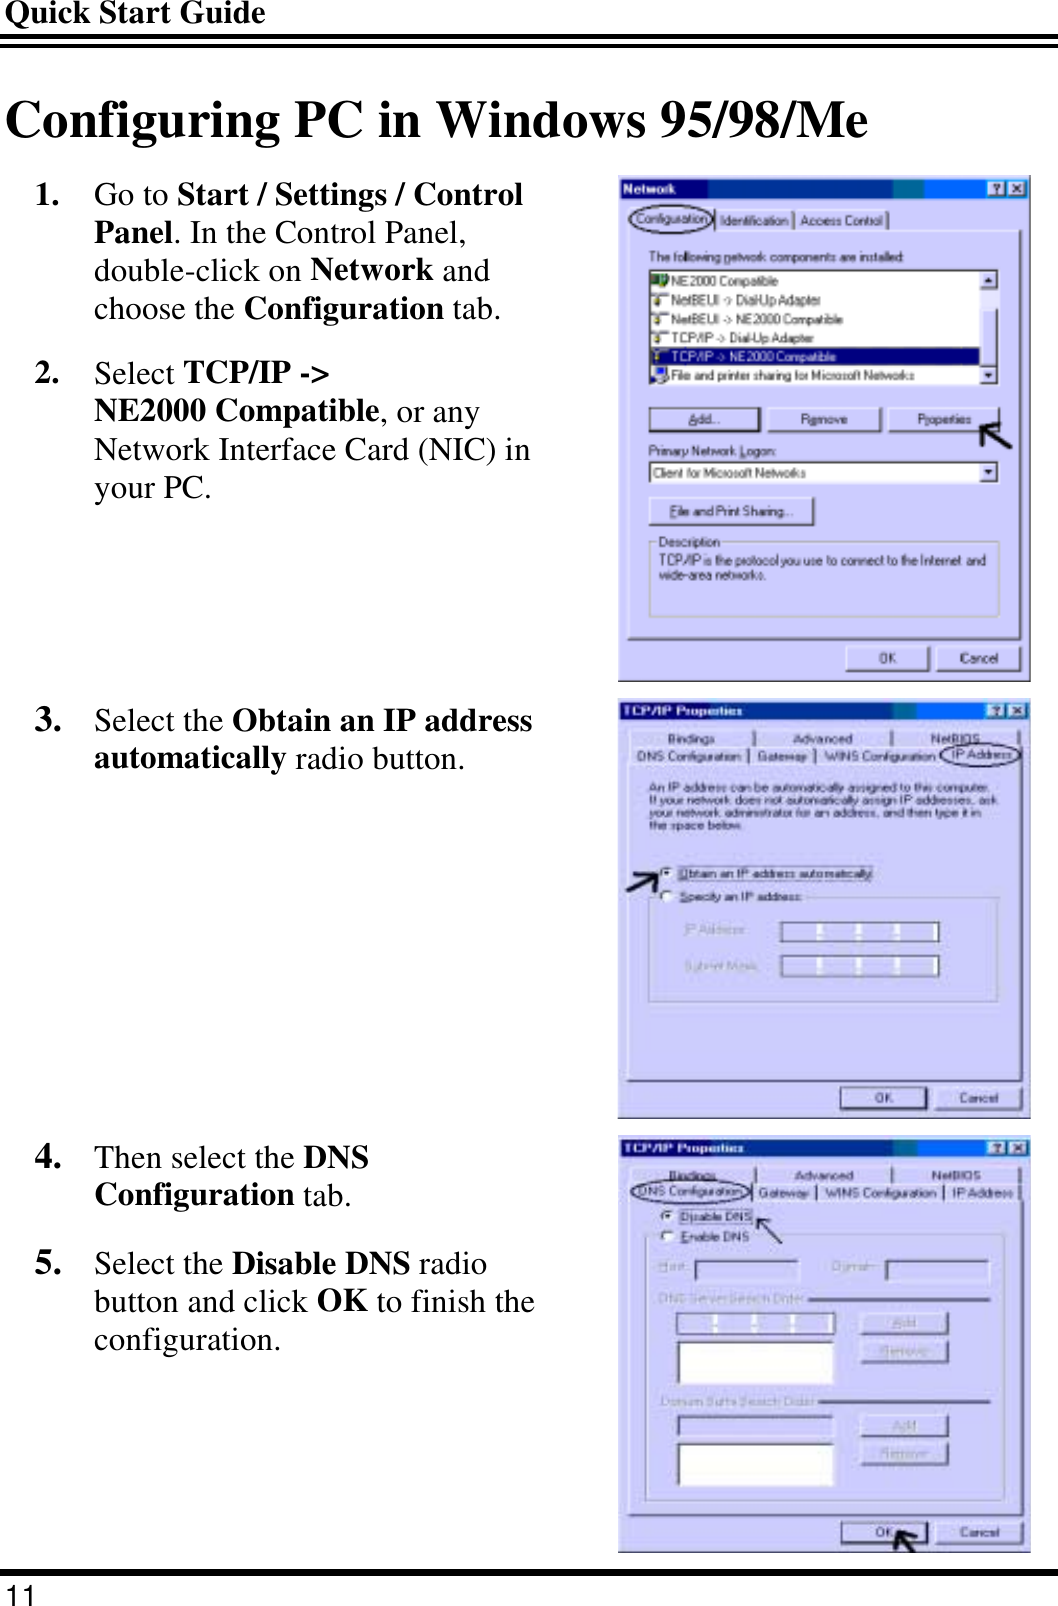 Quick Start Guide 11 Configuring PC in Windows 95/98/Me 1.  Go to Start / Settings / Control Panel. In the Control Panel, double-click on Network and choose the Configuration tab. 2.  Select TCP/IP -&gt; NE2000 Compatible, or any Network Interface Card (NIC) in your PC.  3.  Select the Obtain an IP address automatically radio button.  4.  Then select the DNS Configuration tab. 5.  Select the Disable DNS radio button and click OK to finish the configuration.  